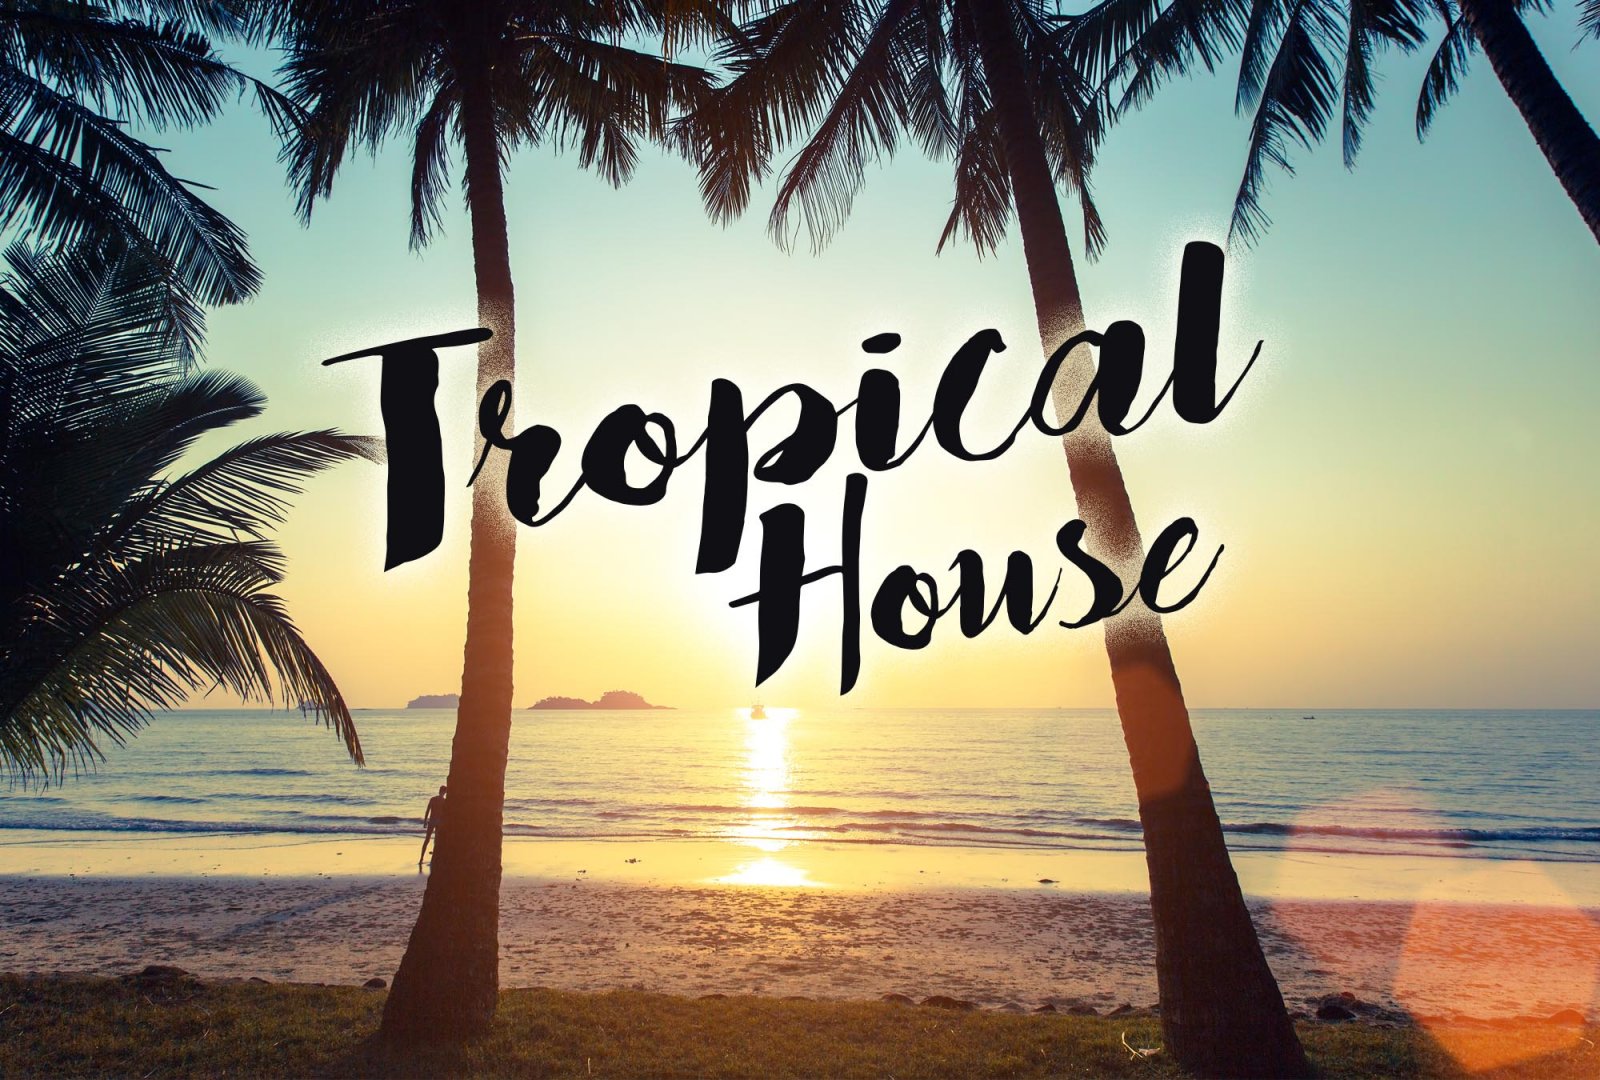 Is Tropical House What Happens When Anyone Can Be A Producer?